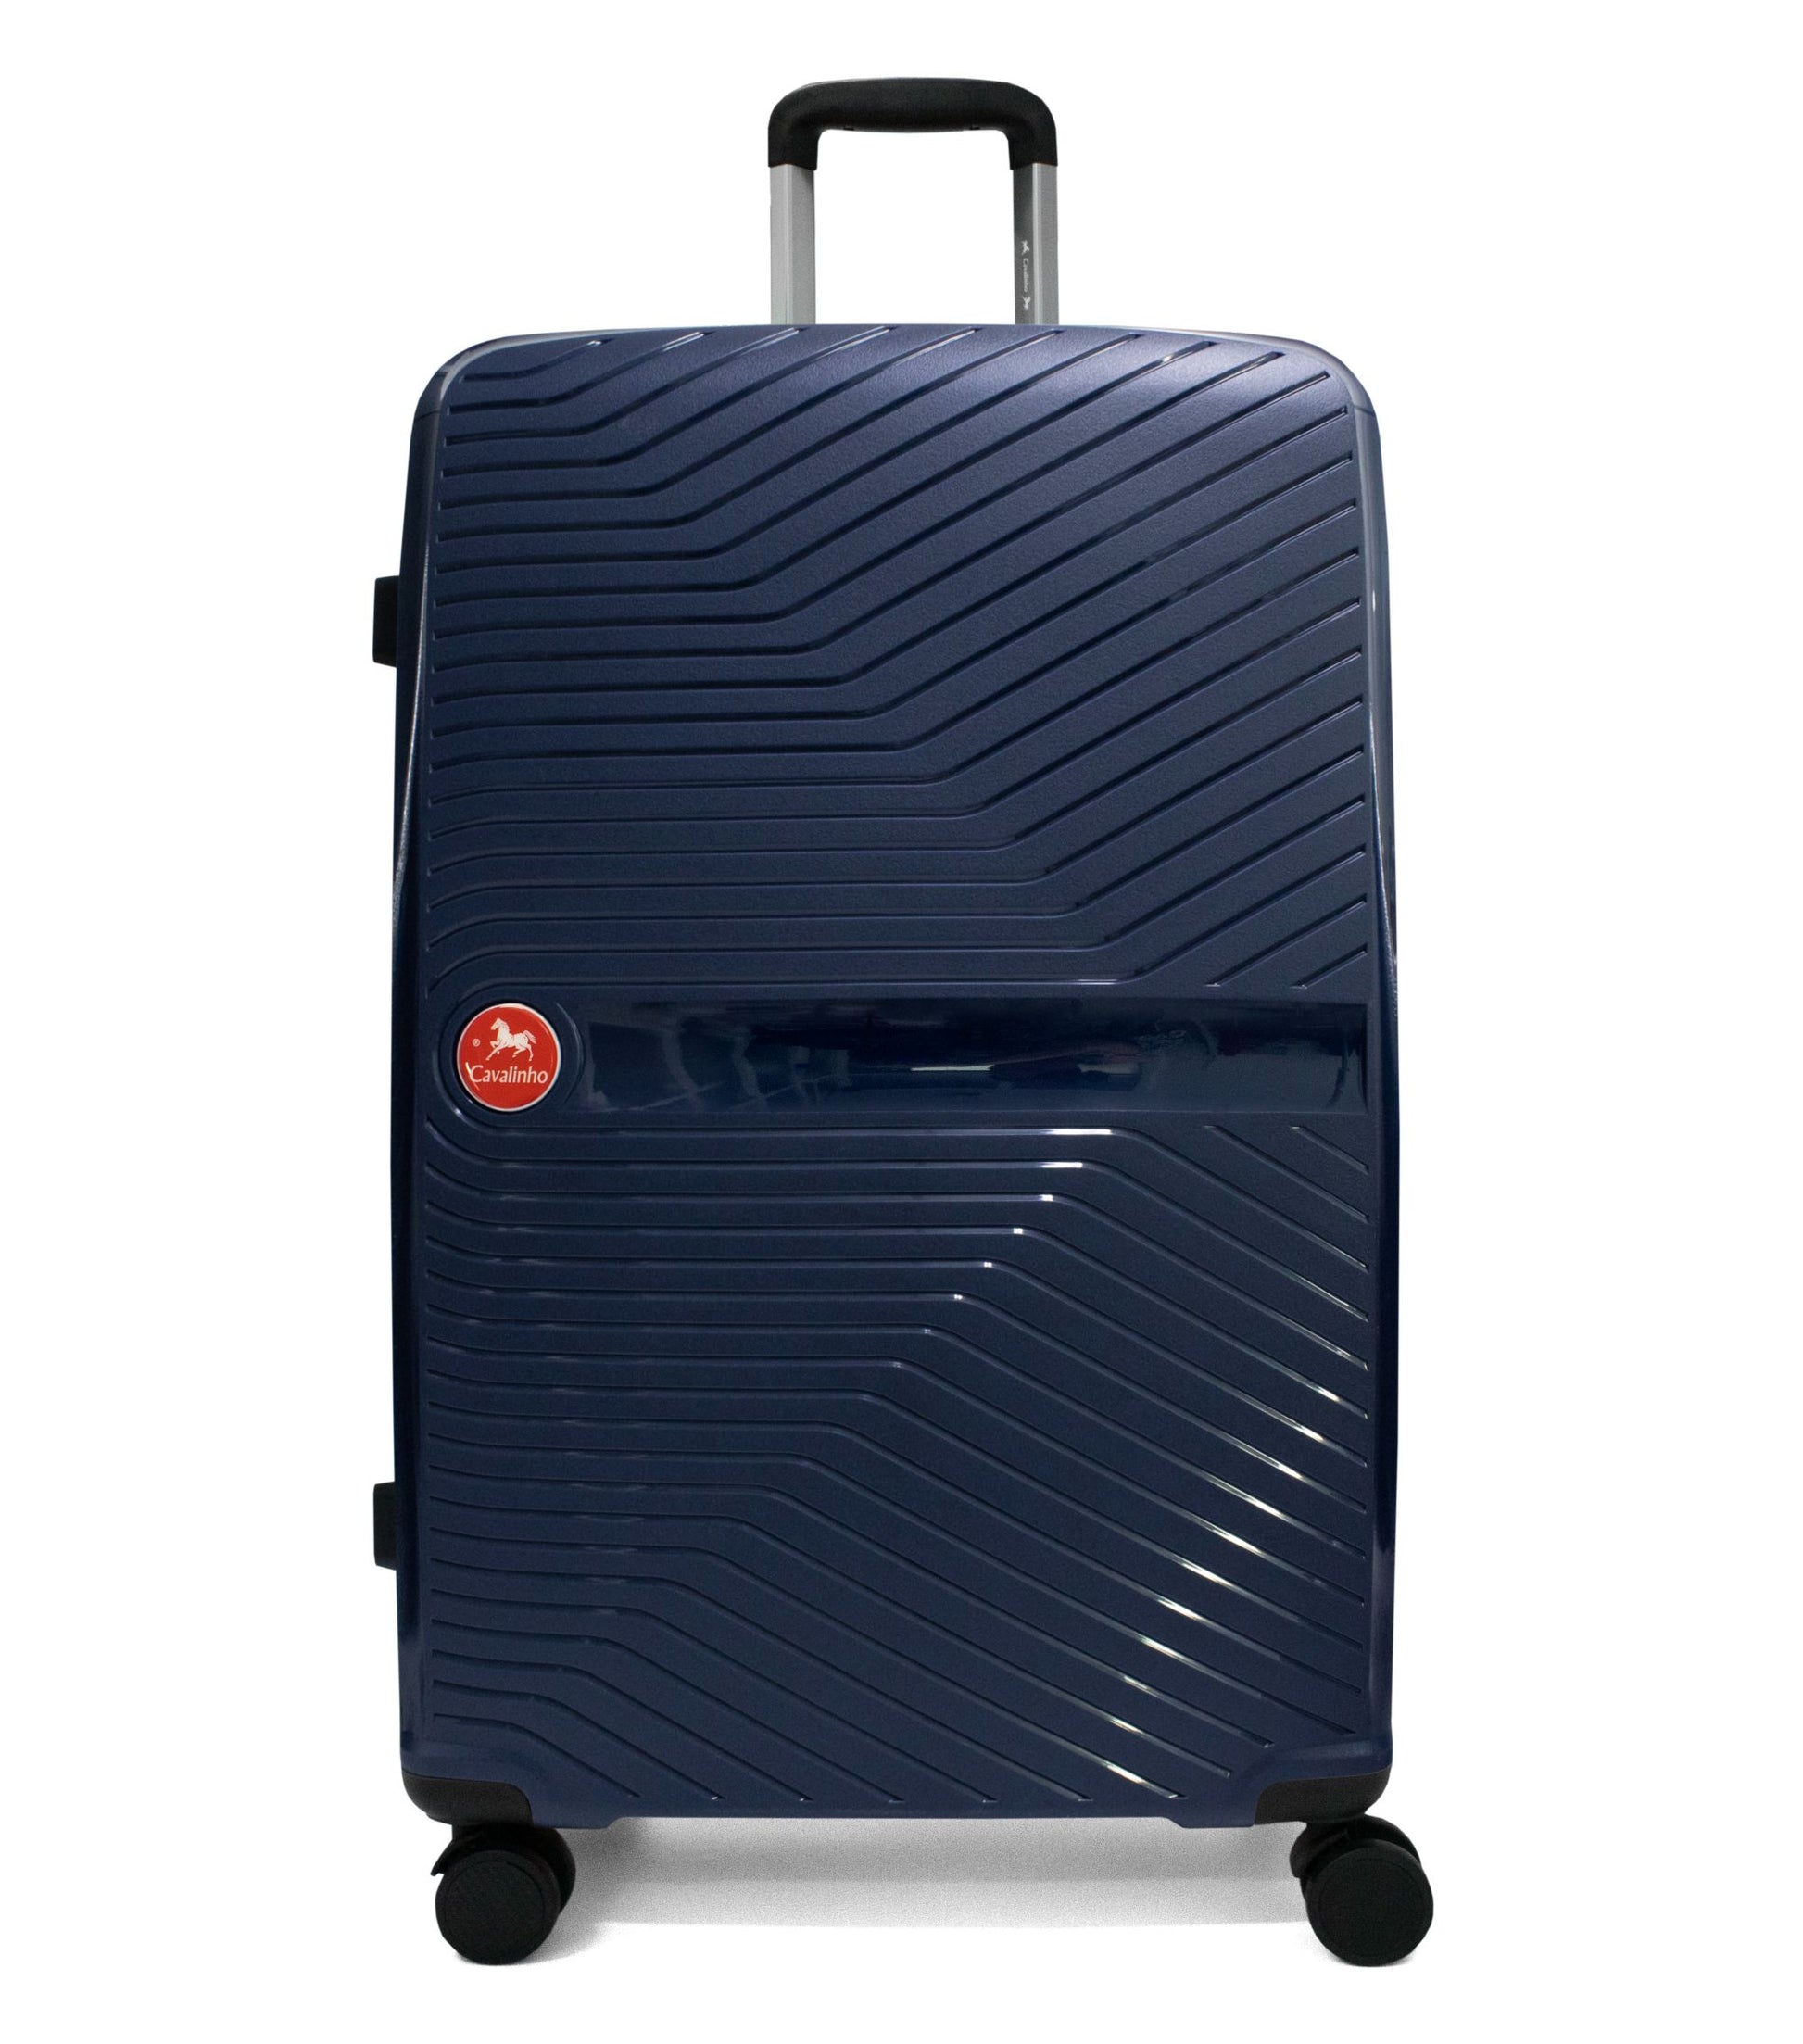 Cavalinho Colorful Check-in Hardside Luggage (28") - 28 inch Navy - 68020004.03.28_1